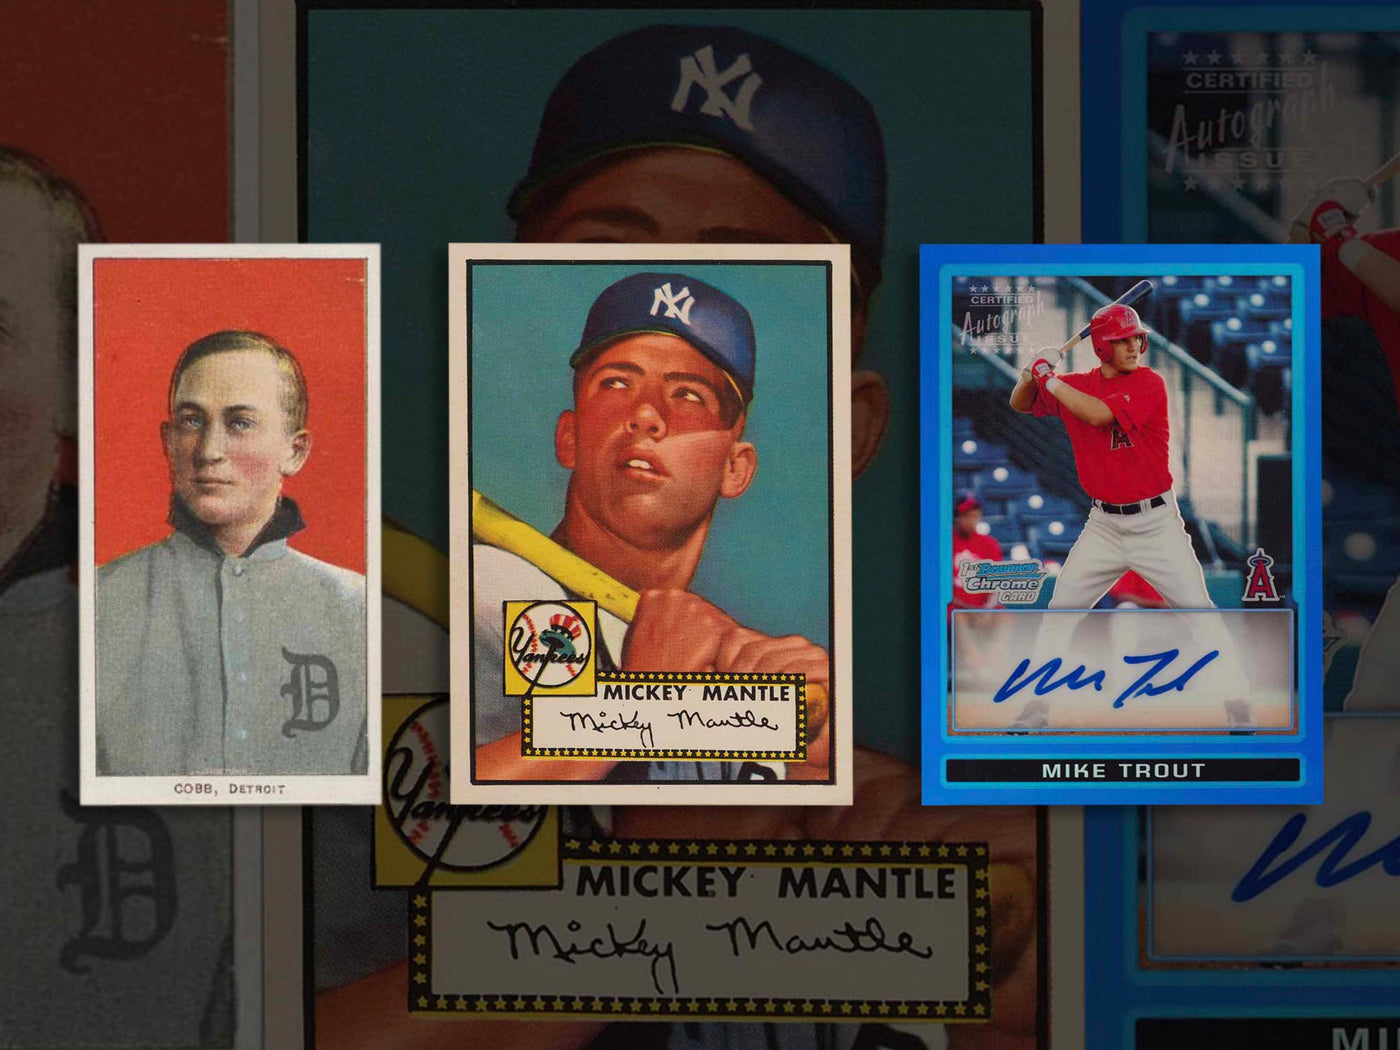 Three classic baseball cards displayed side by side. From left to right: a 1909 T206 featuring Ty Cobb, a 1952 Topps card of Mickey Mantle, and a 2009 Bowman Chrome Refractor Autograph card of Mike Trout